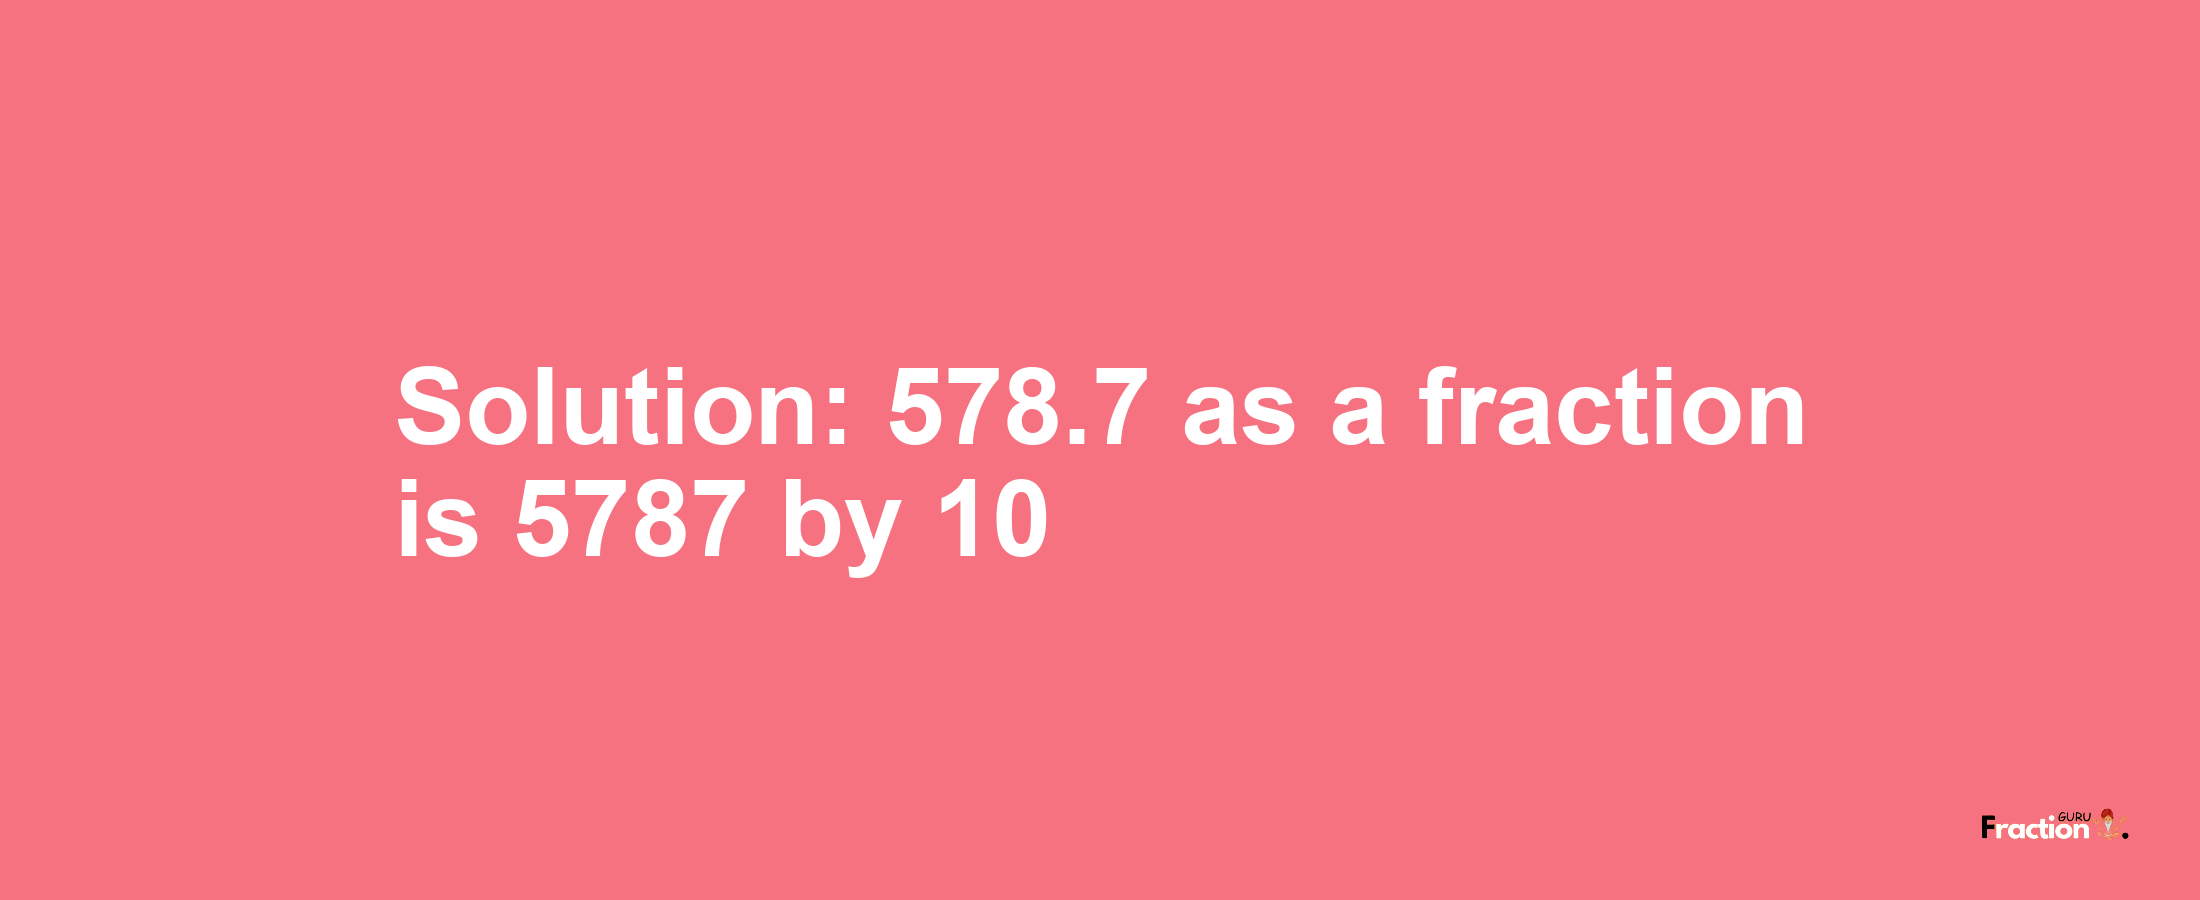 Solution:578.7 as a fraction is 5787/10